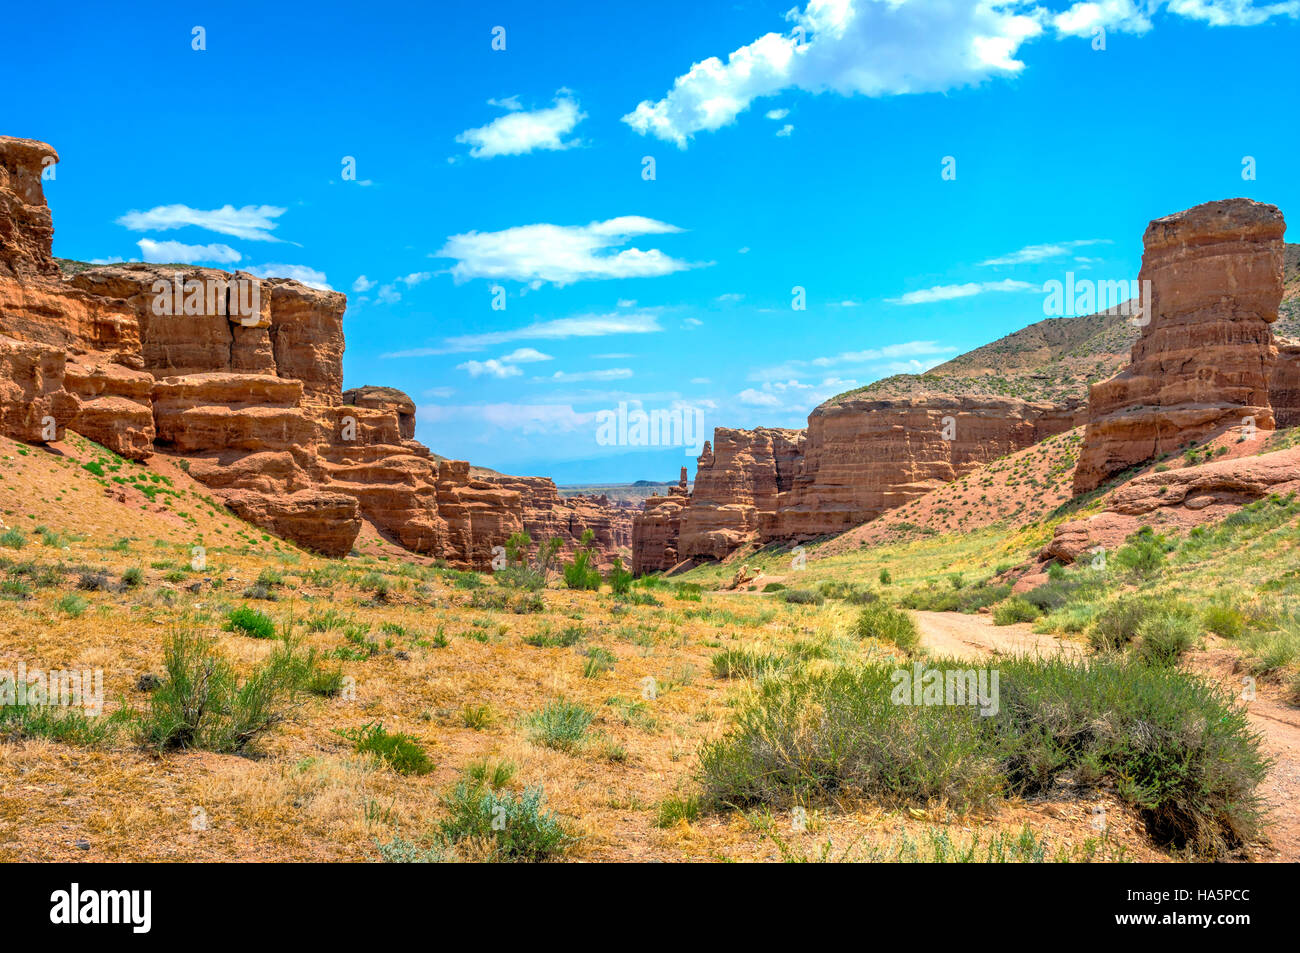 View over Sharyn or Charyn Canyon, Kazakhstan, second biggest canyon in the world Stock Photo